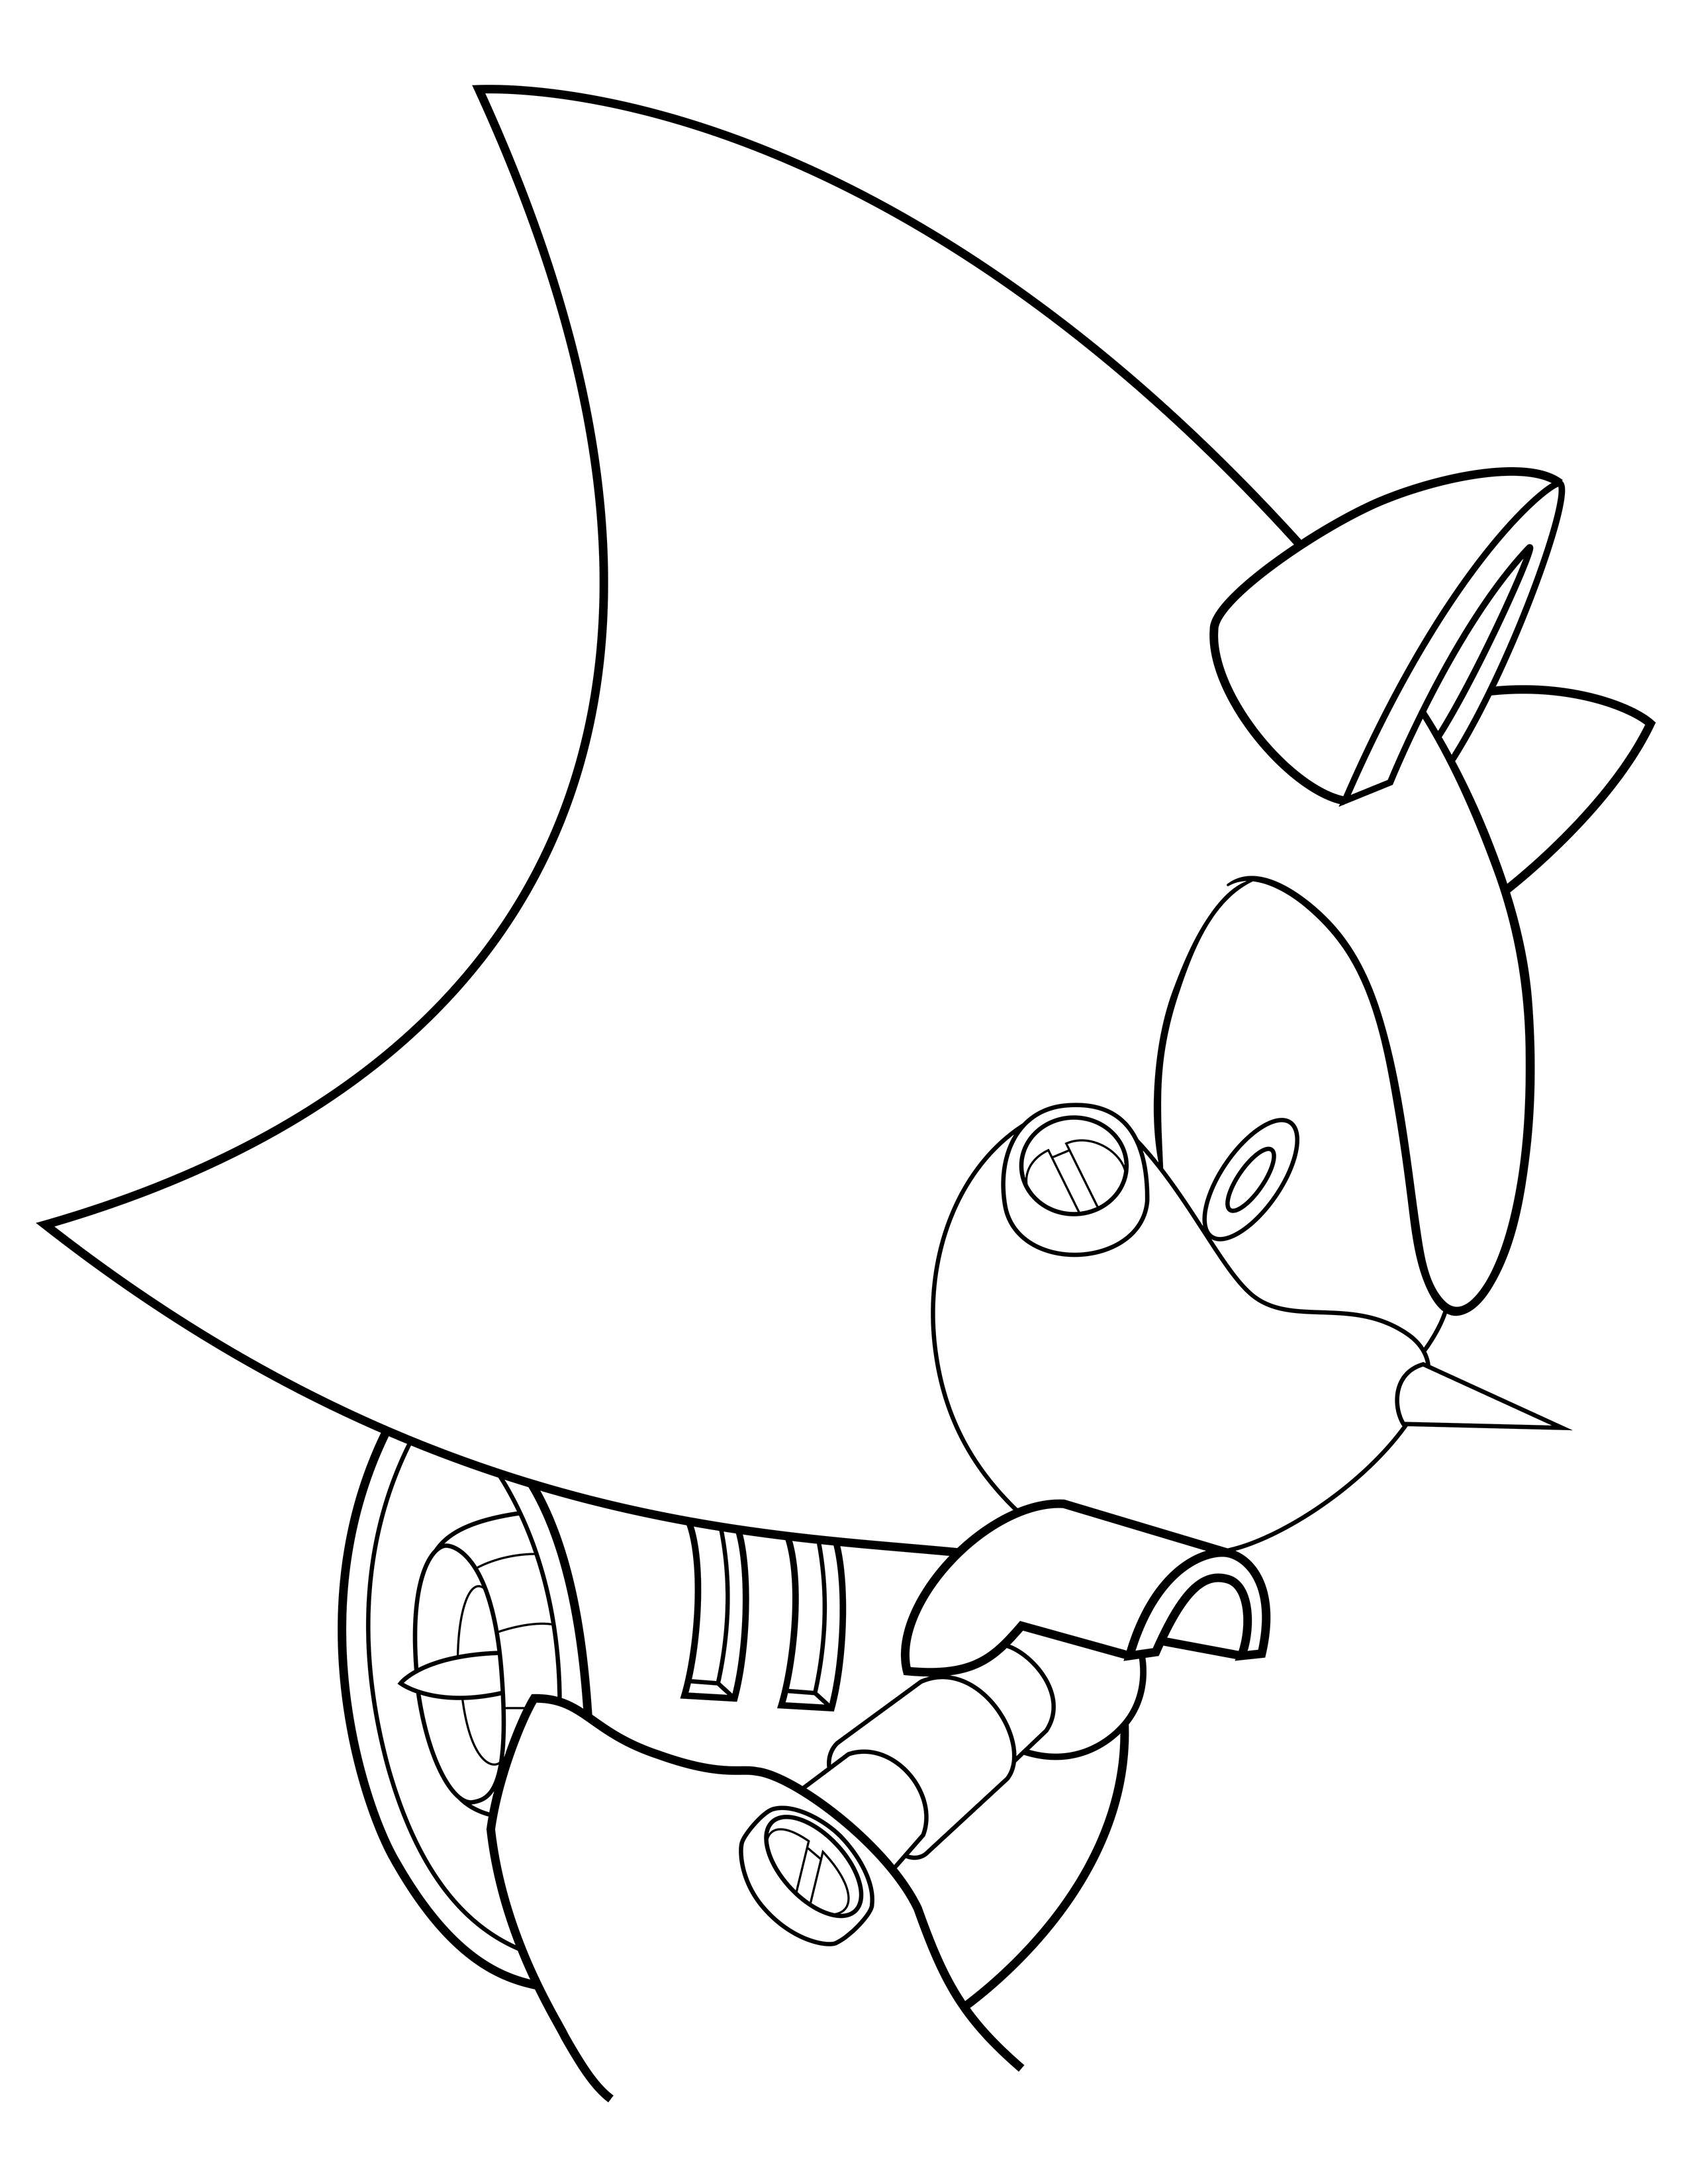 Coloring page - Metal Sonic